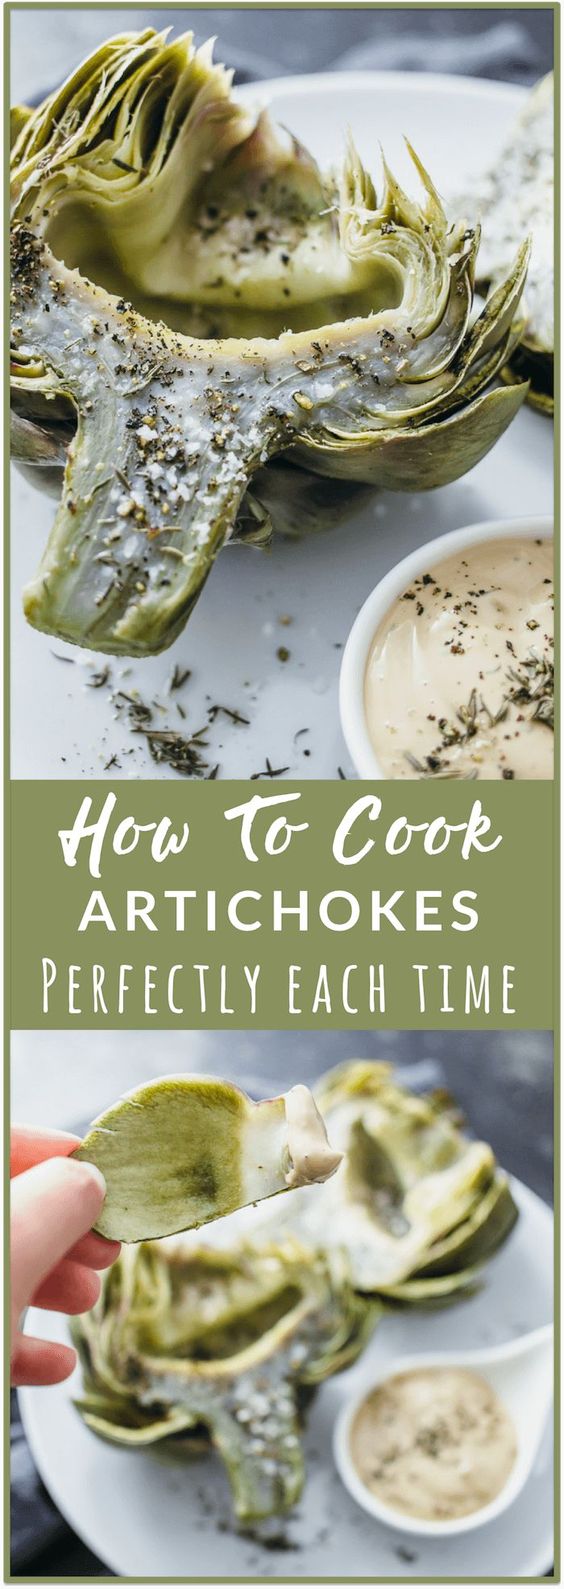 How To Cook Artichokes Perfectly Each Time